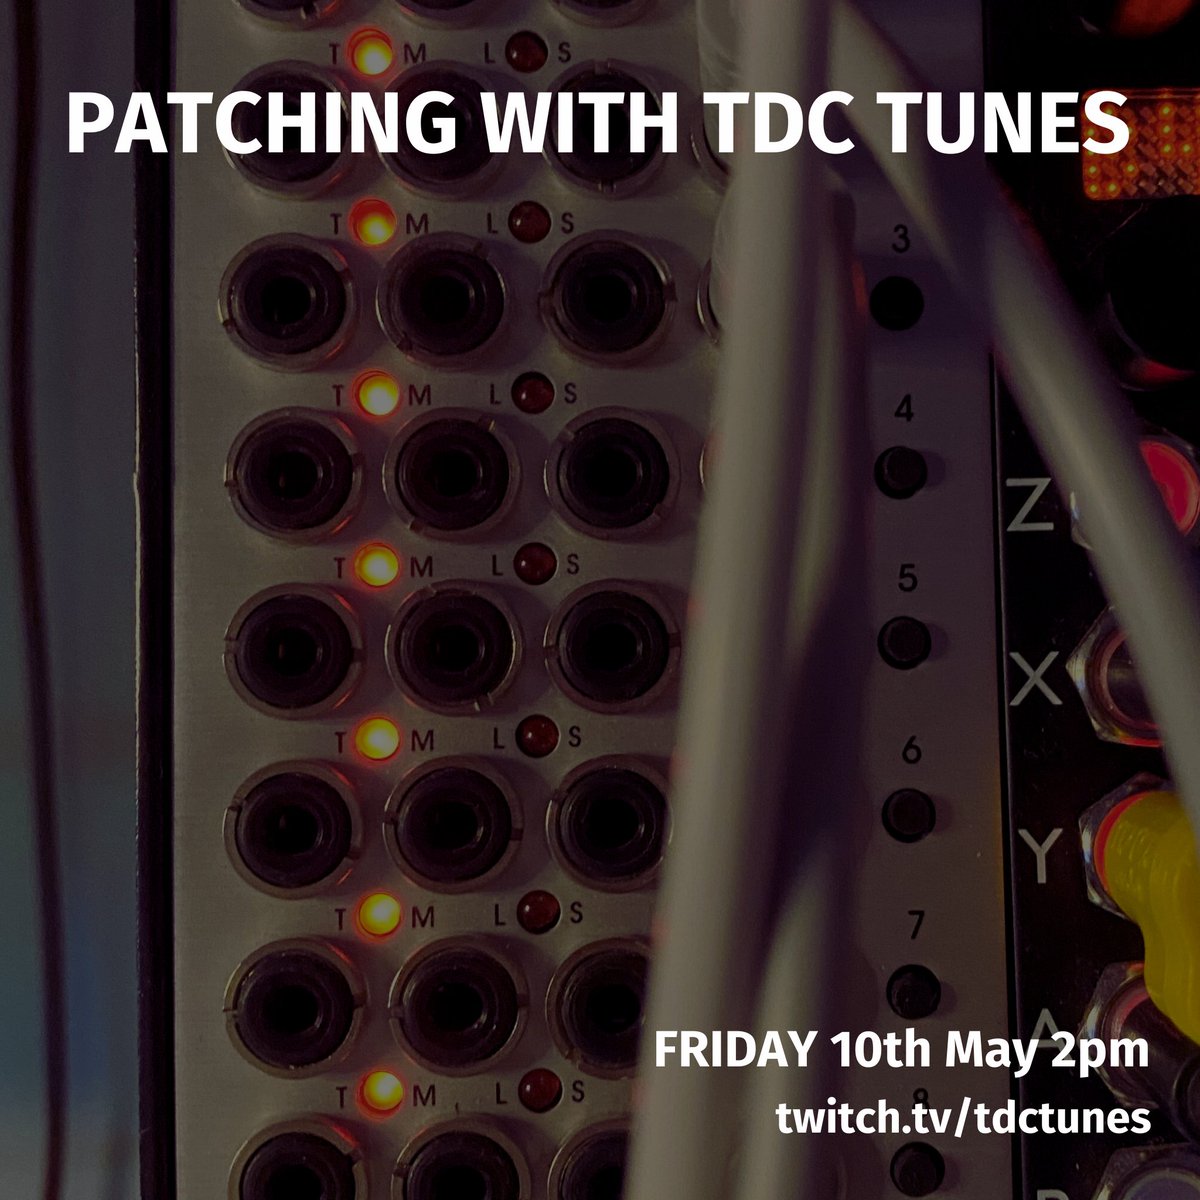 ooo what to do with 8 voltage controlled switches? hmmmmmm twitch.tv/tdctunes #twitchmusic